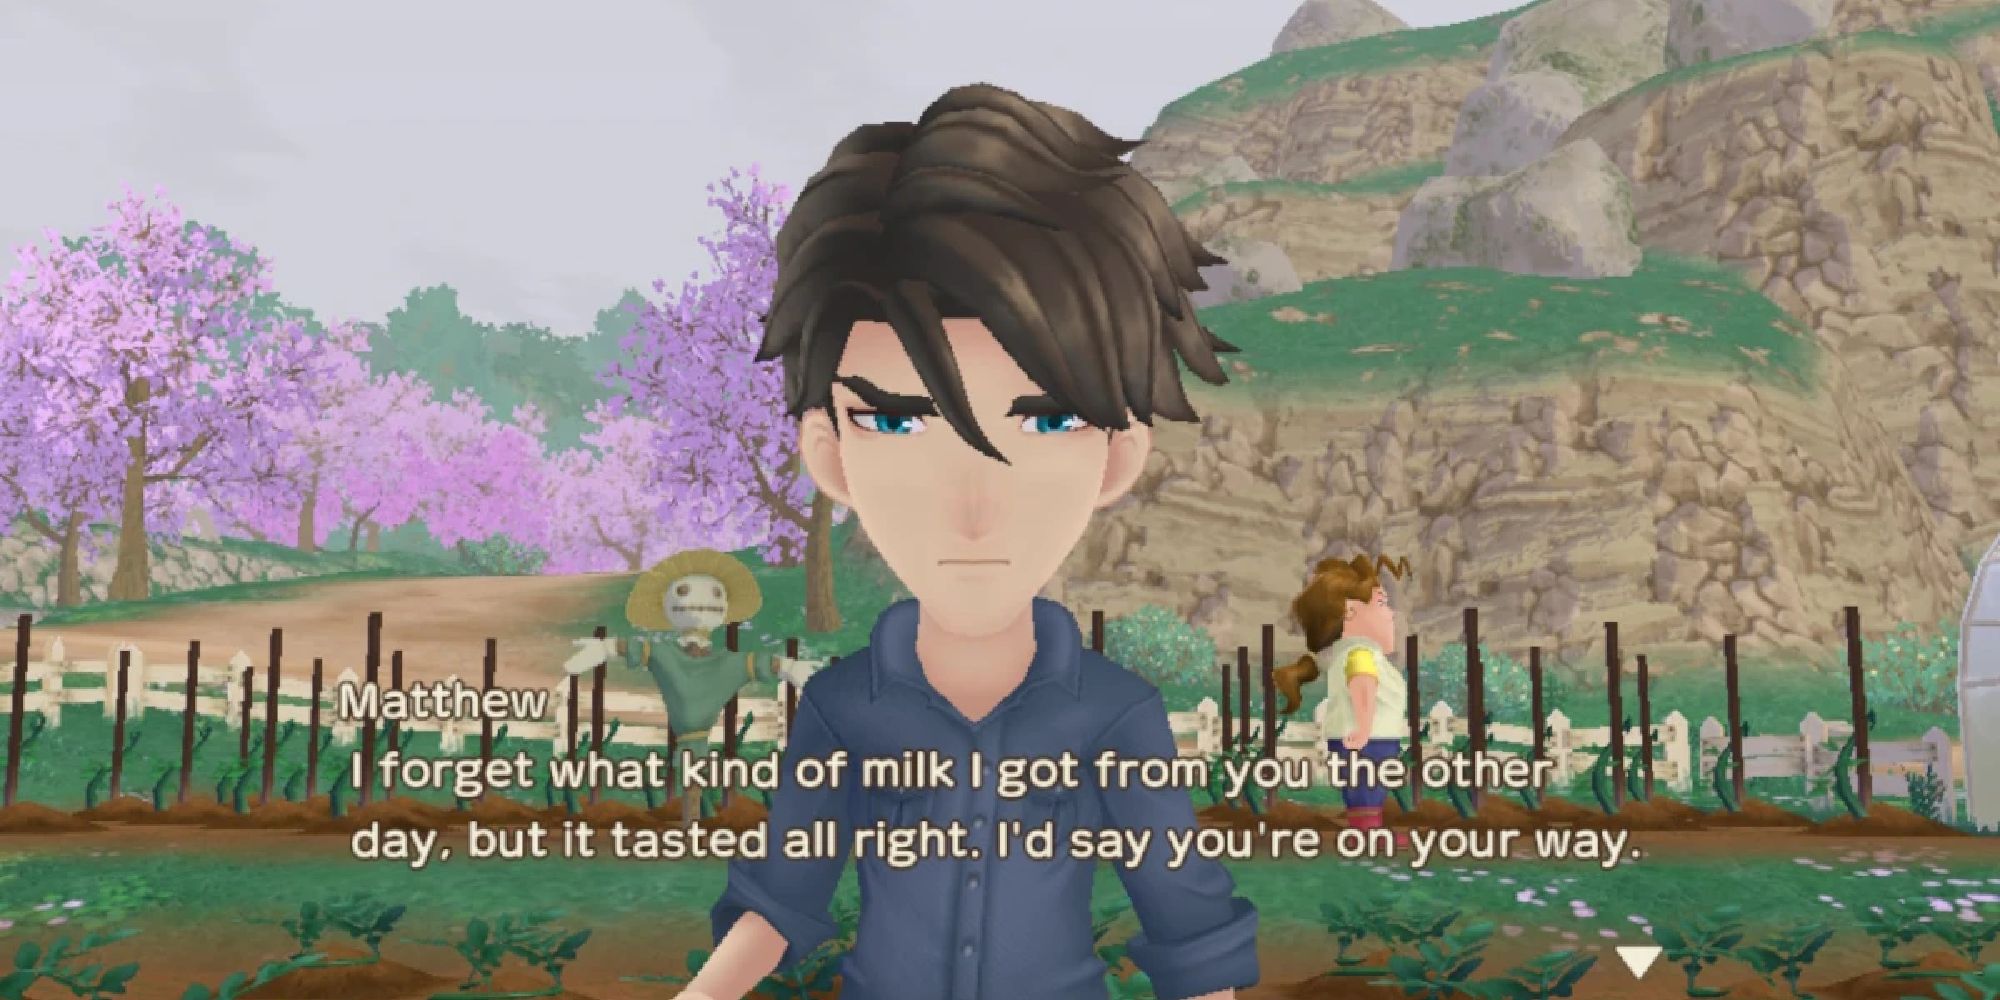 Matthew frowns at the player as they stand together in the farm. Text beneath him reads 'I forget what kind of milk I got from you the other day, but it tasted all right. I'd say you're on your way.'